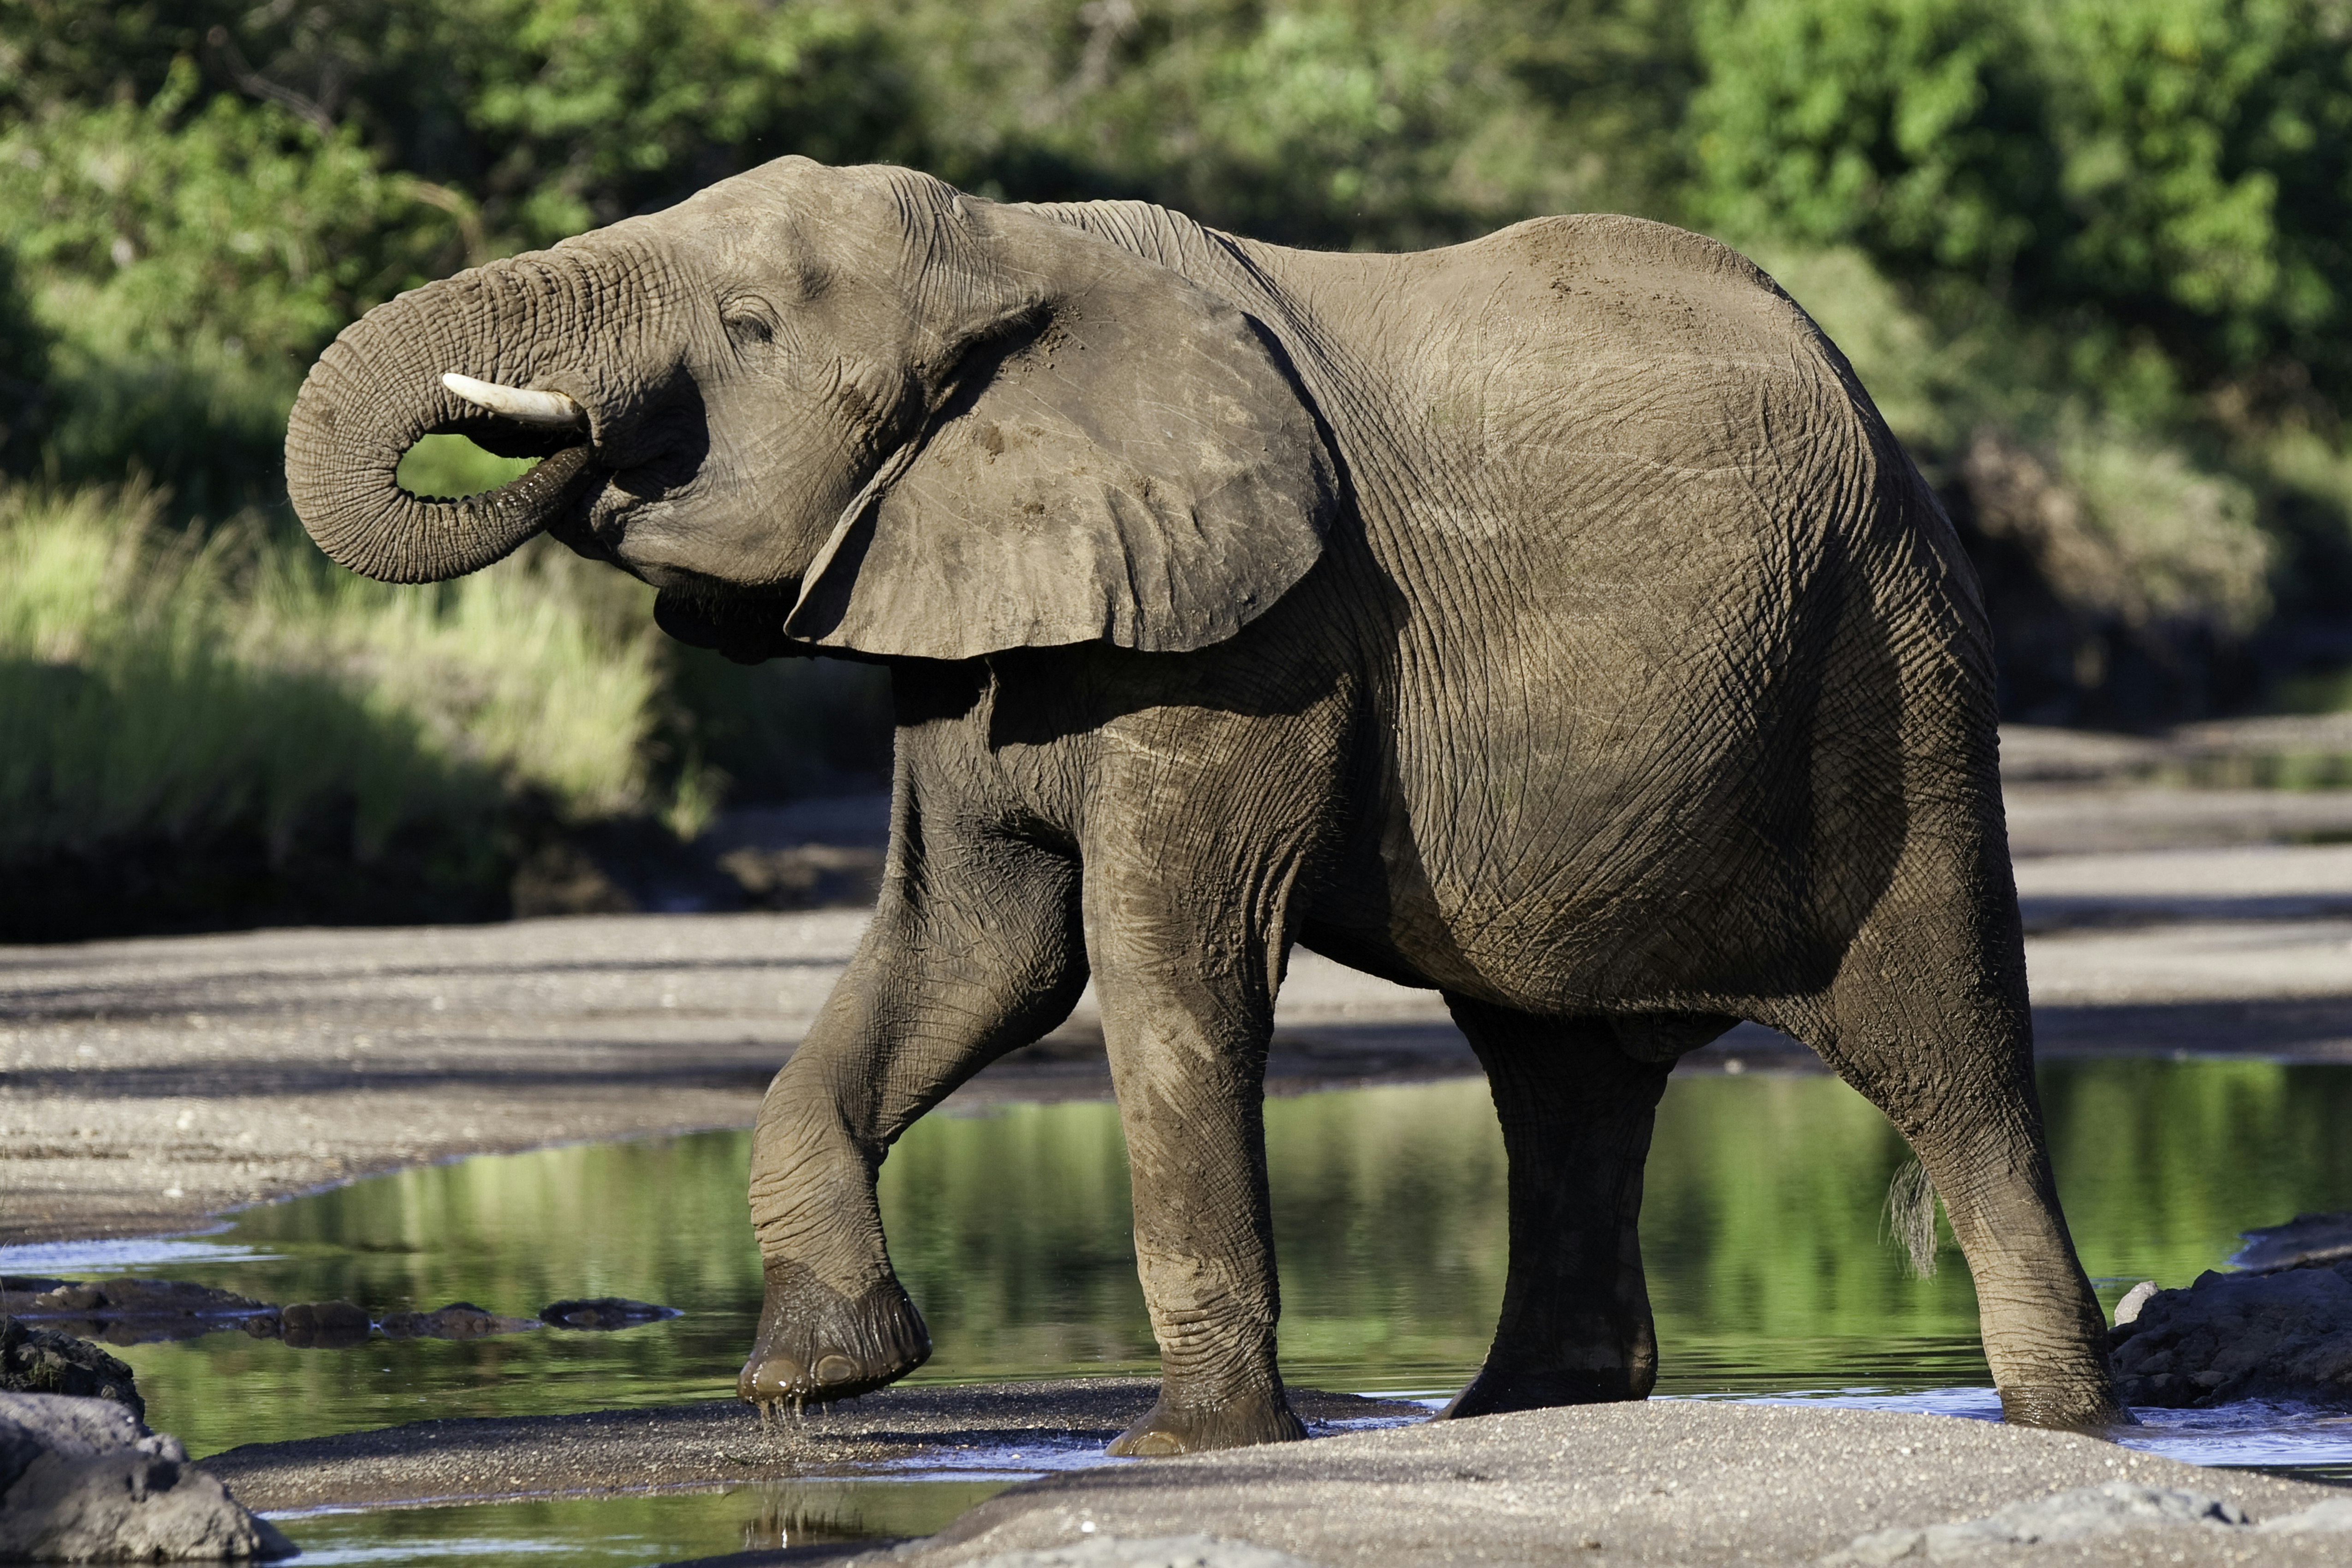 An African elephant with small tusks drinks water scooped from the river with its trunk in the Mashatu Game Reserve in the Tuli Block region of Botswana